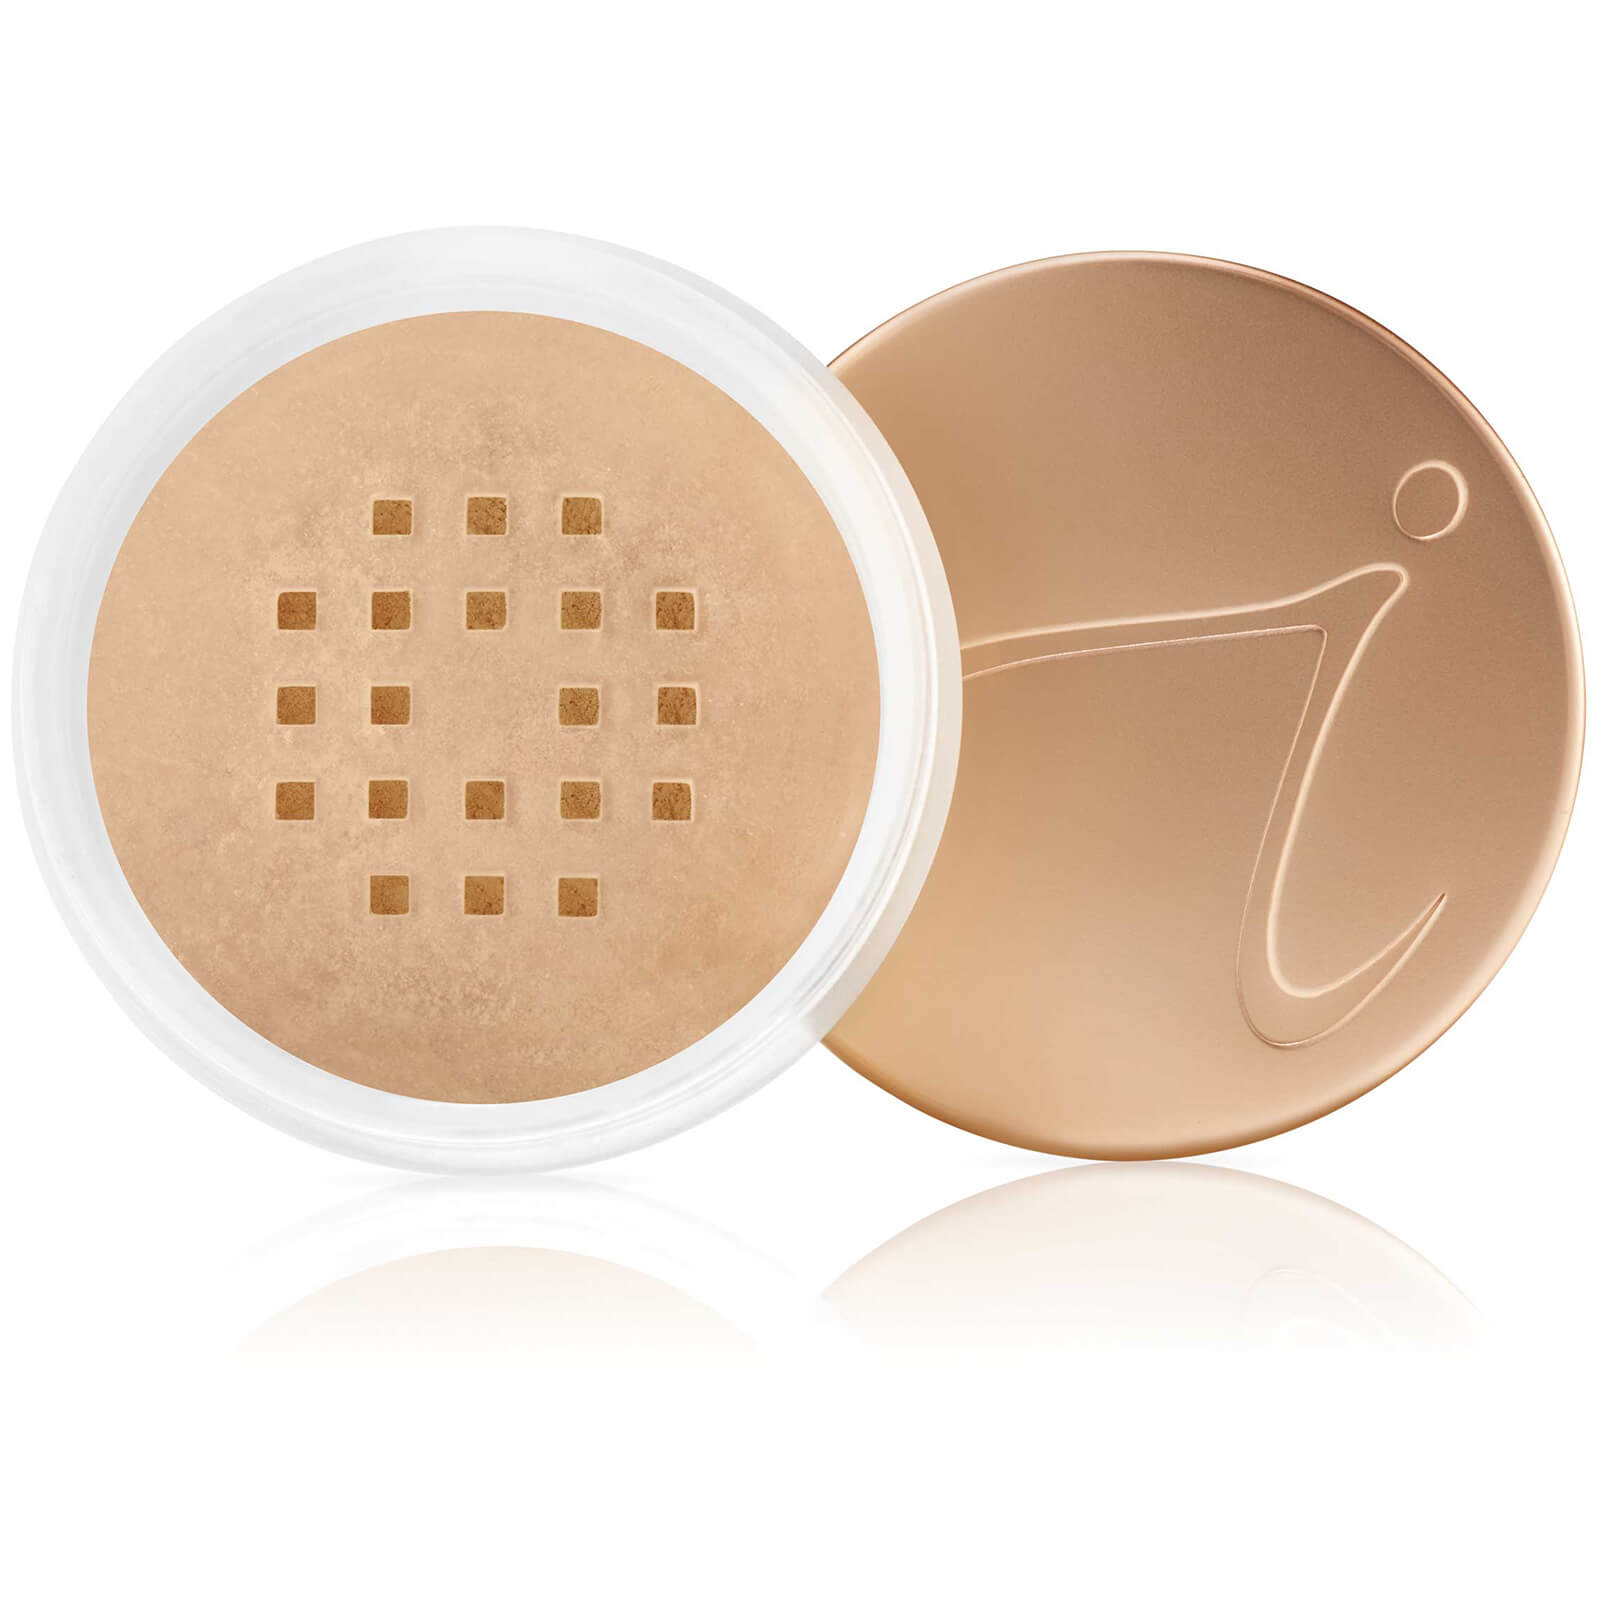 jane iredale Amazing Base Loose Mineral Powder SPF 20 (Various Shades) - Bisque